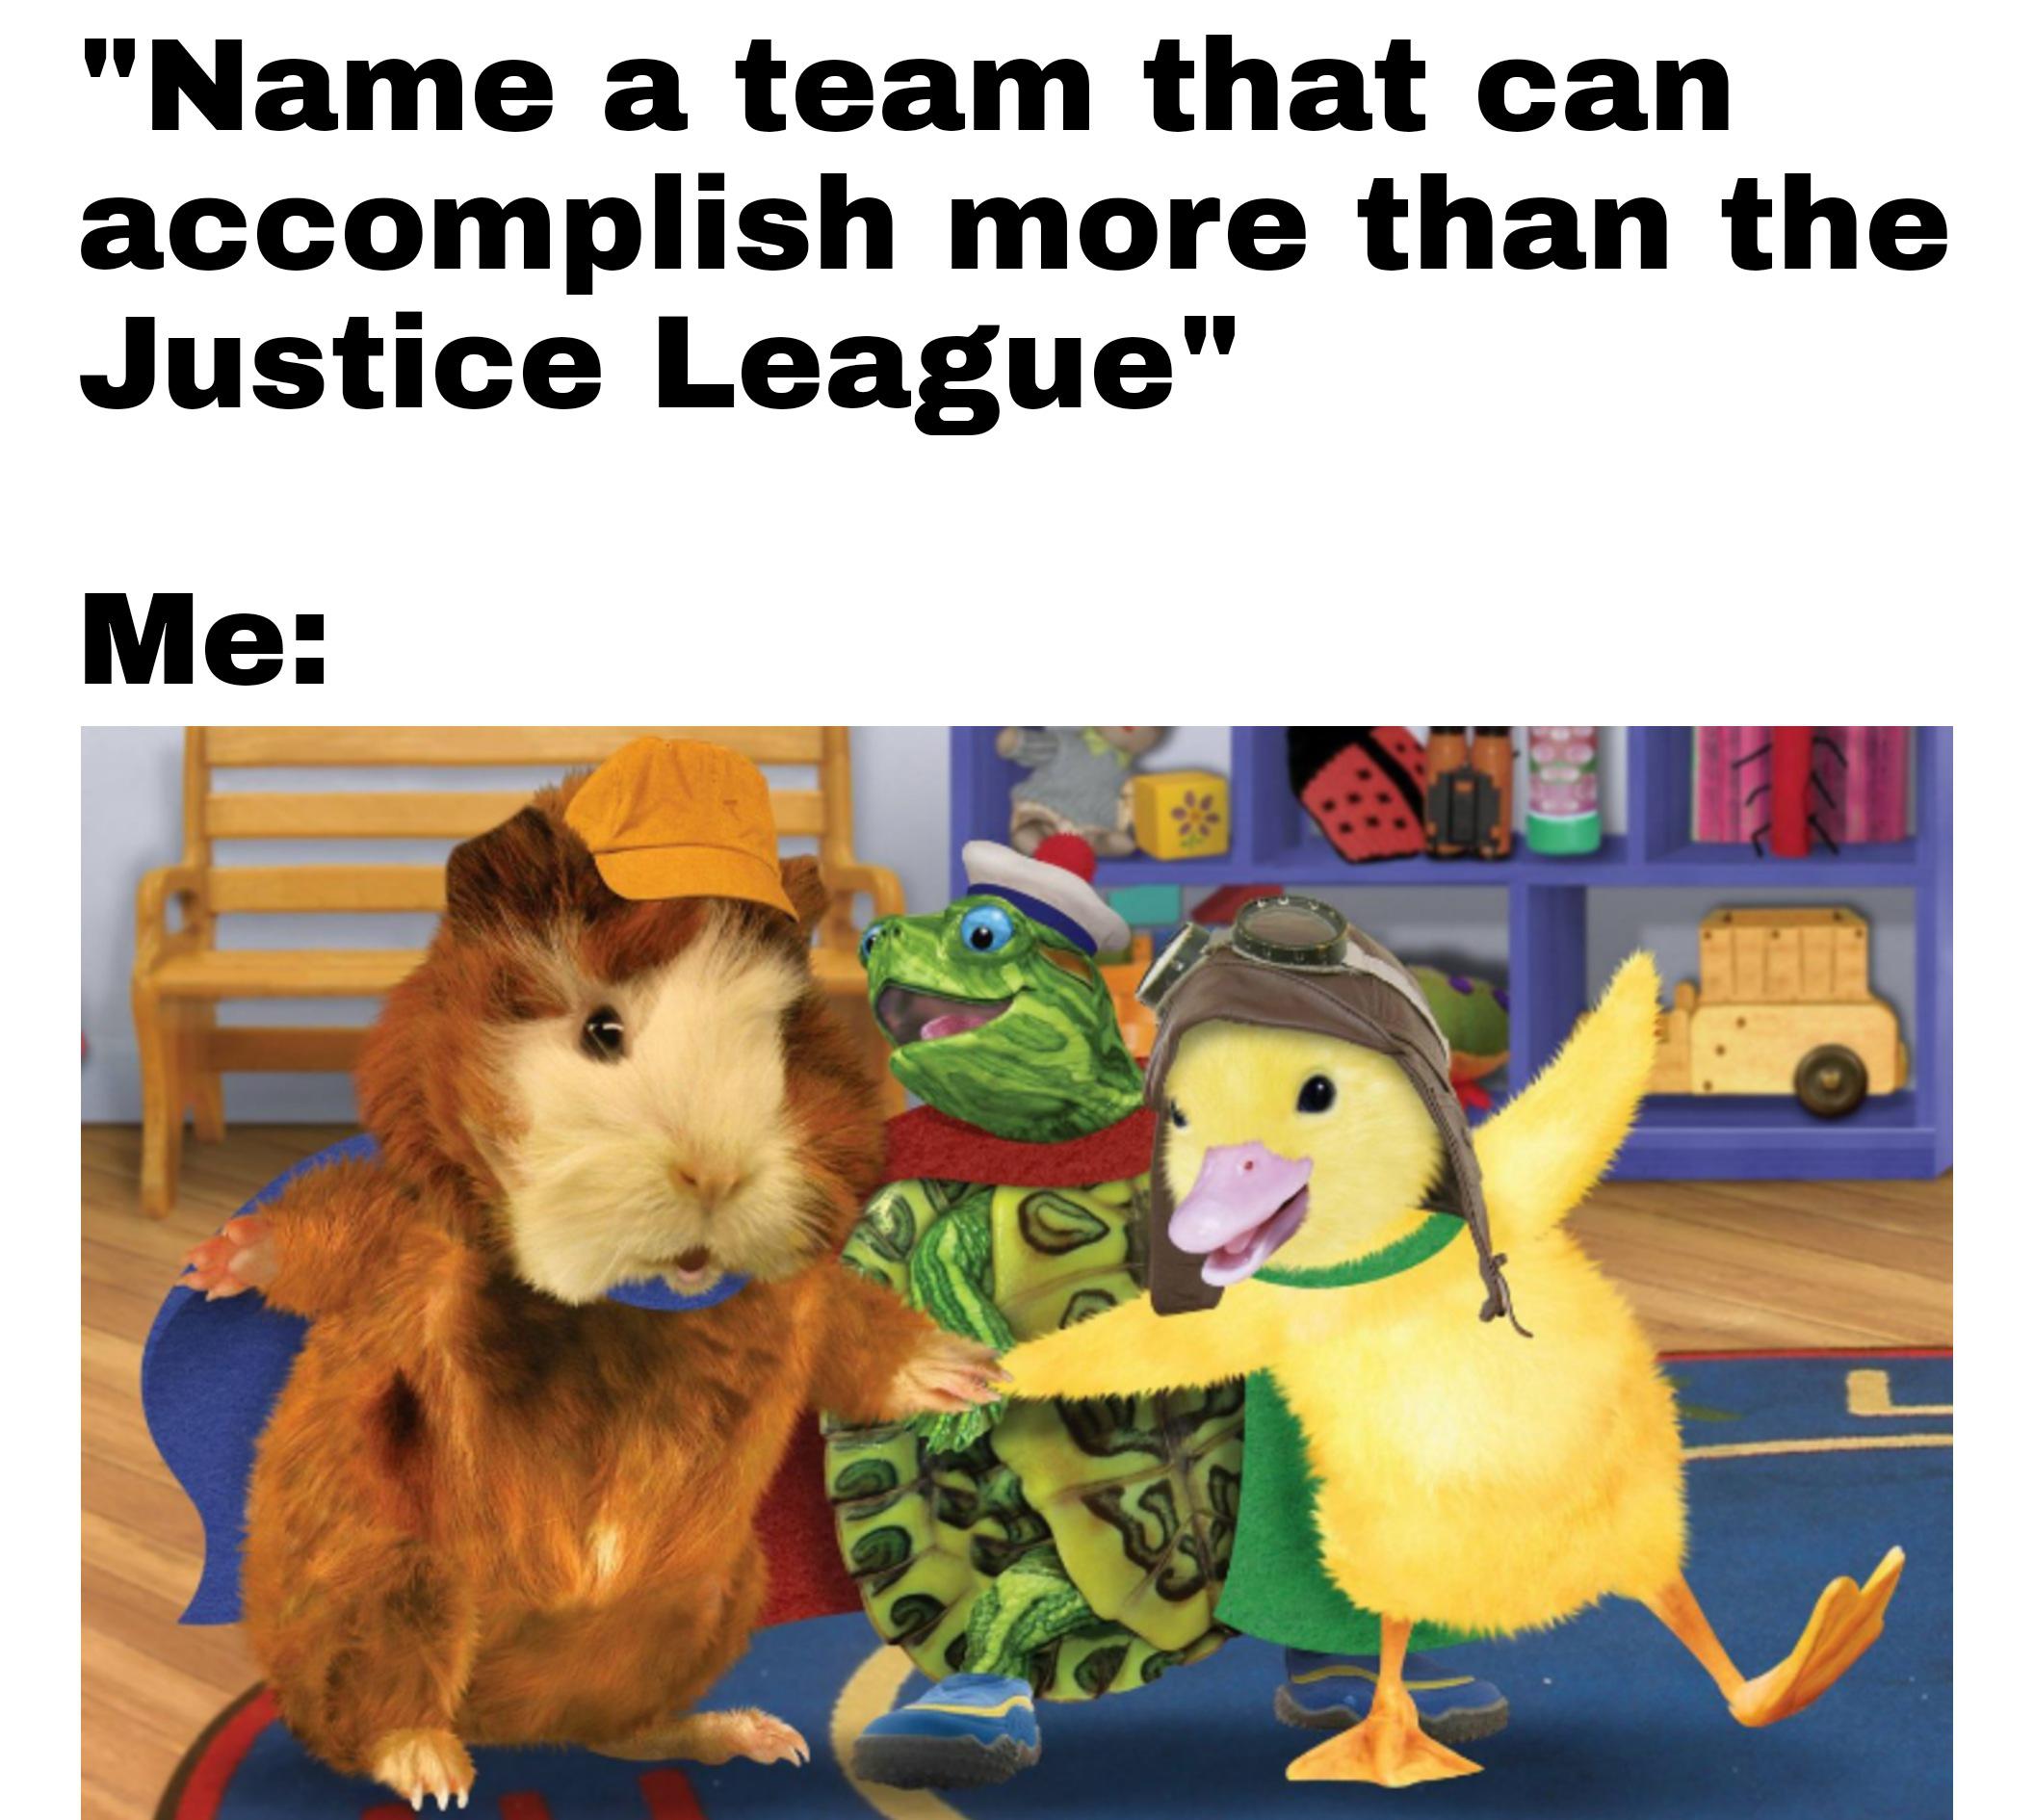 wonder pets - "Name a team that can accomplish more than the Justice League" Me